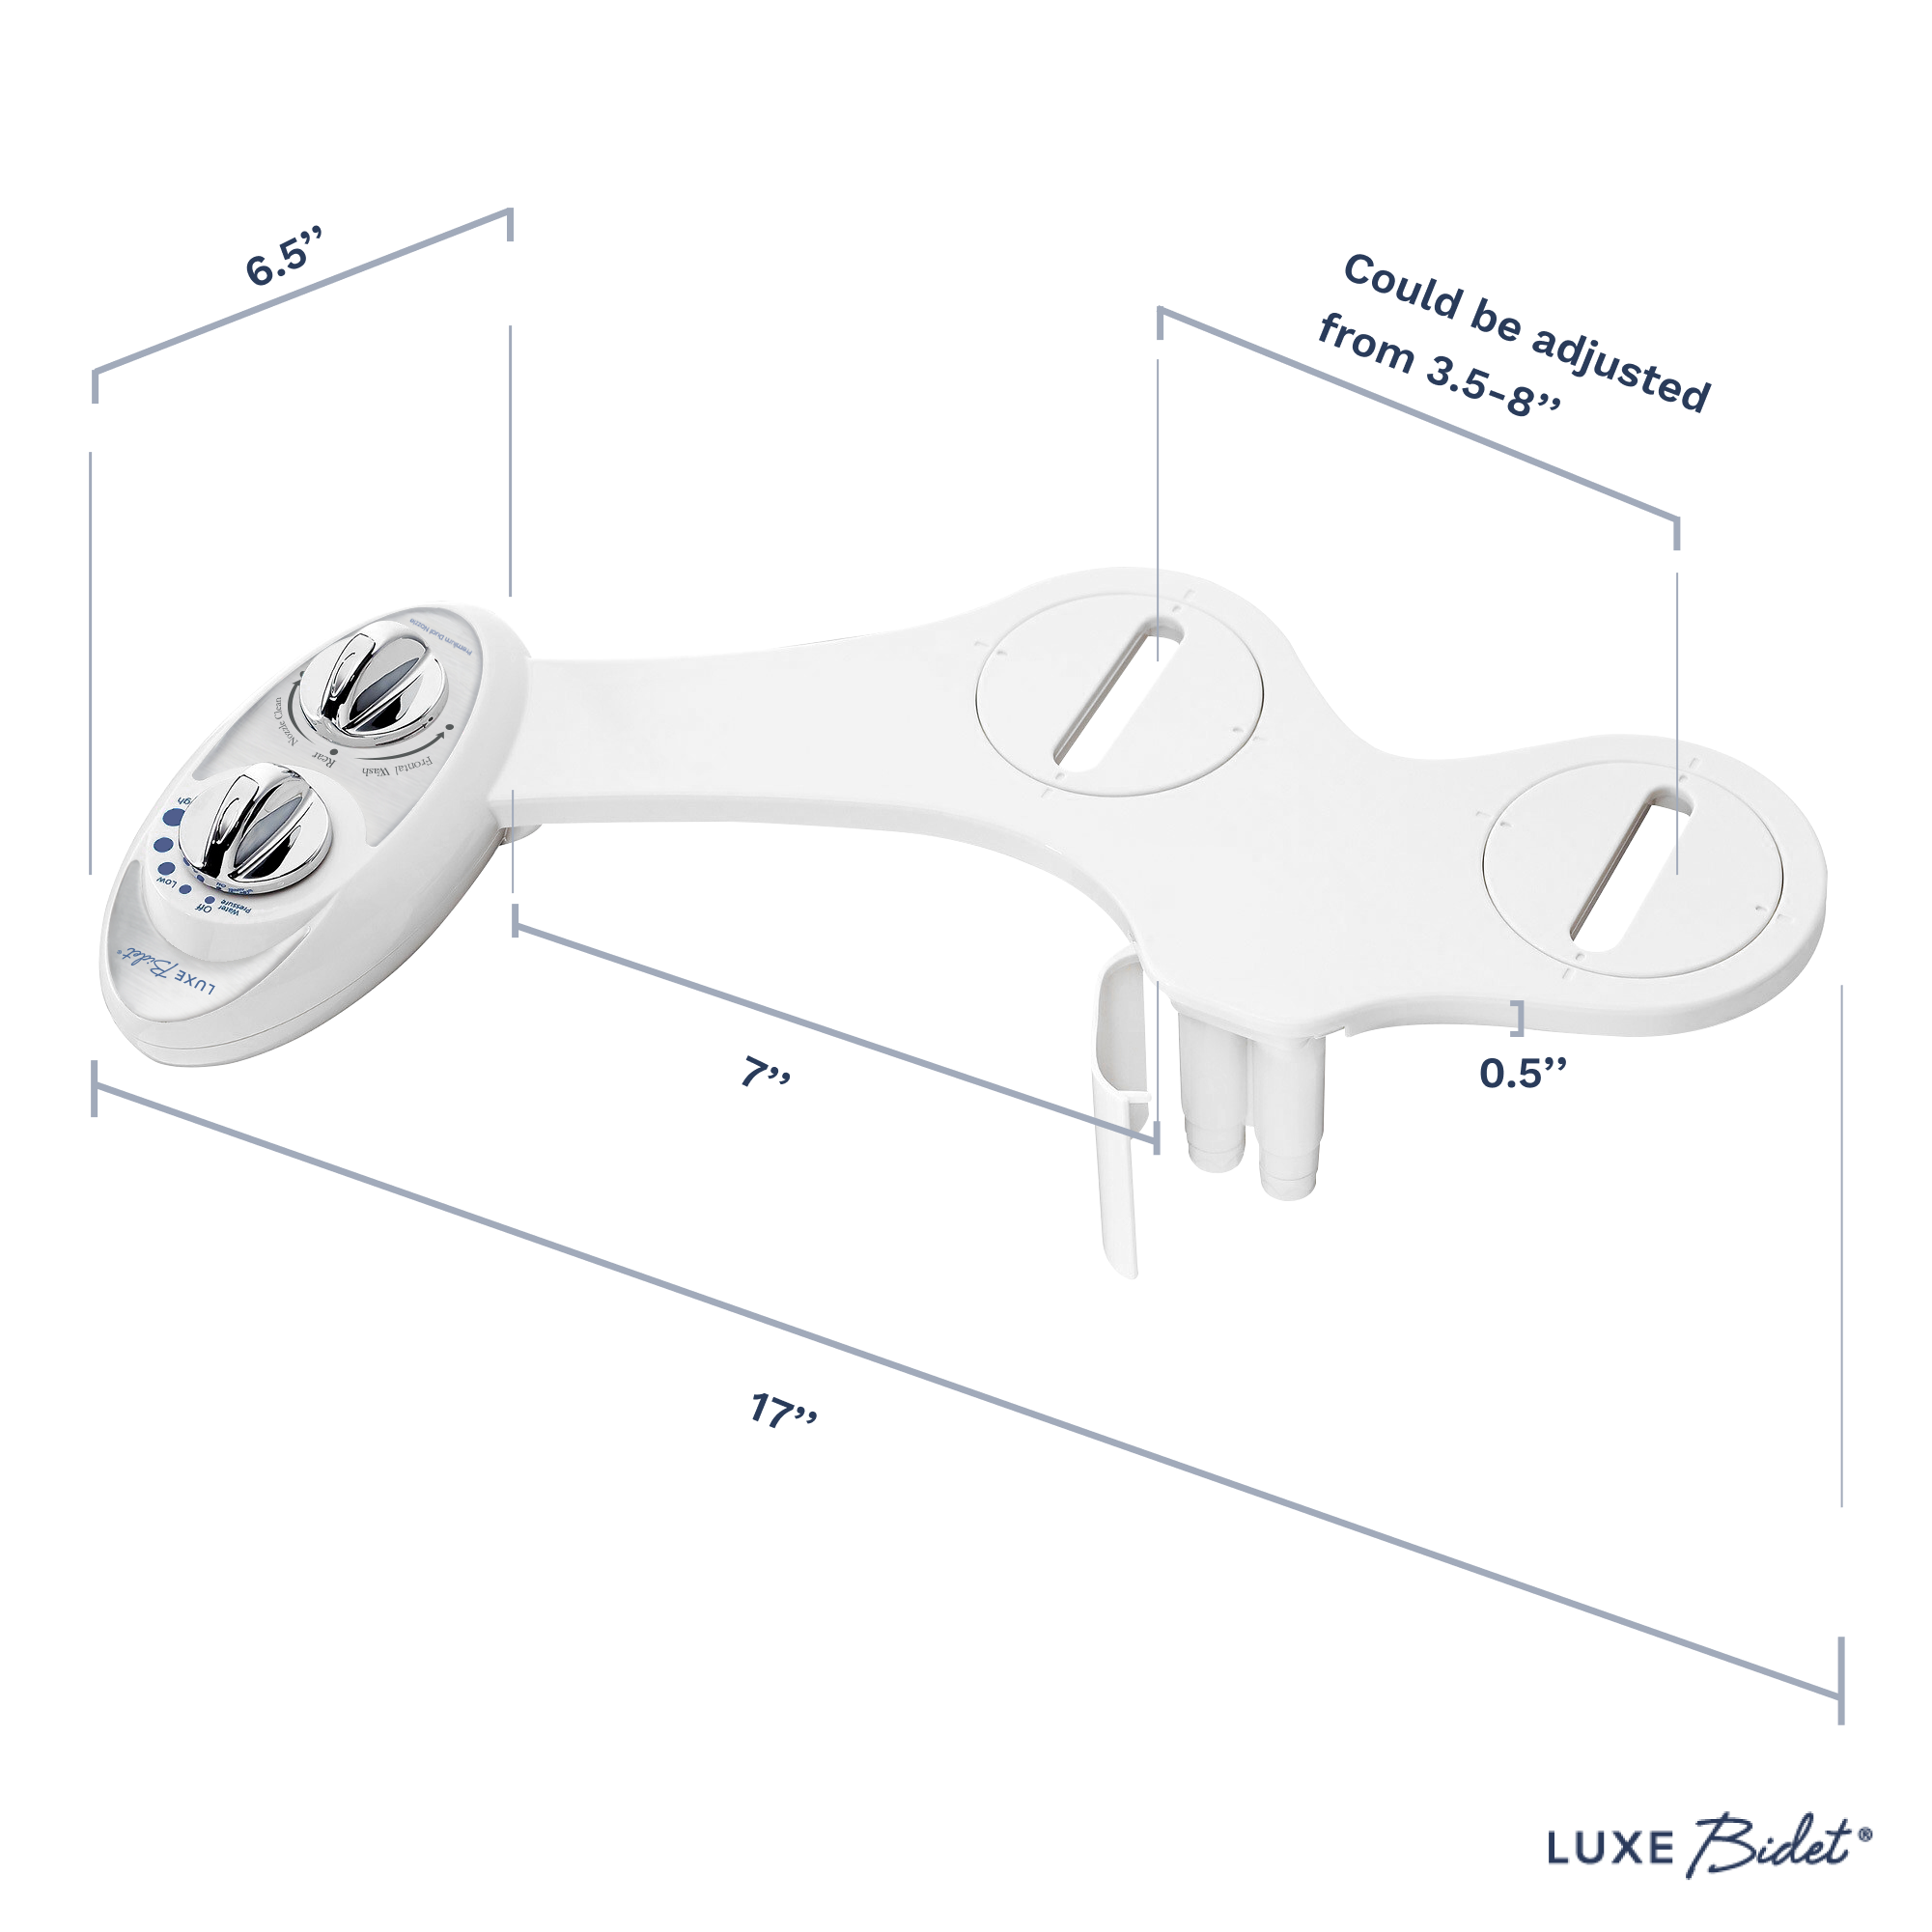 LUXE Bidet W85 Self-Cleaning, Dual Nozzle, Non-Electric Bidet Attachment for Toilet Seat, Adjustable Water Pressure, Rear and Feminine Wash (Pearl Gray) - image 3 of 5